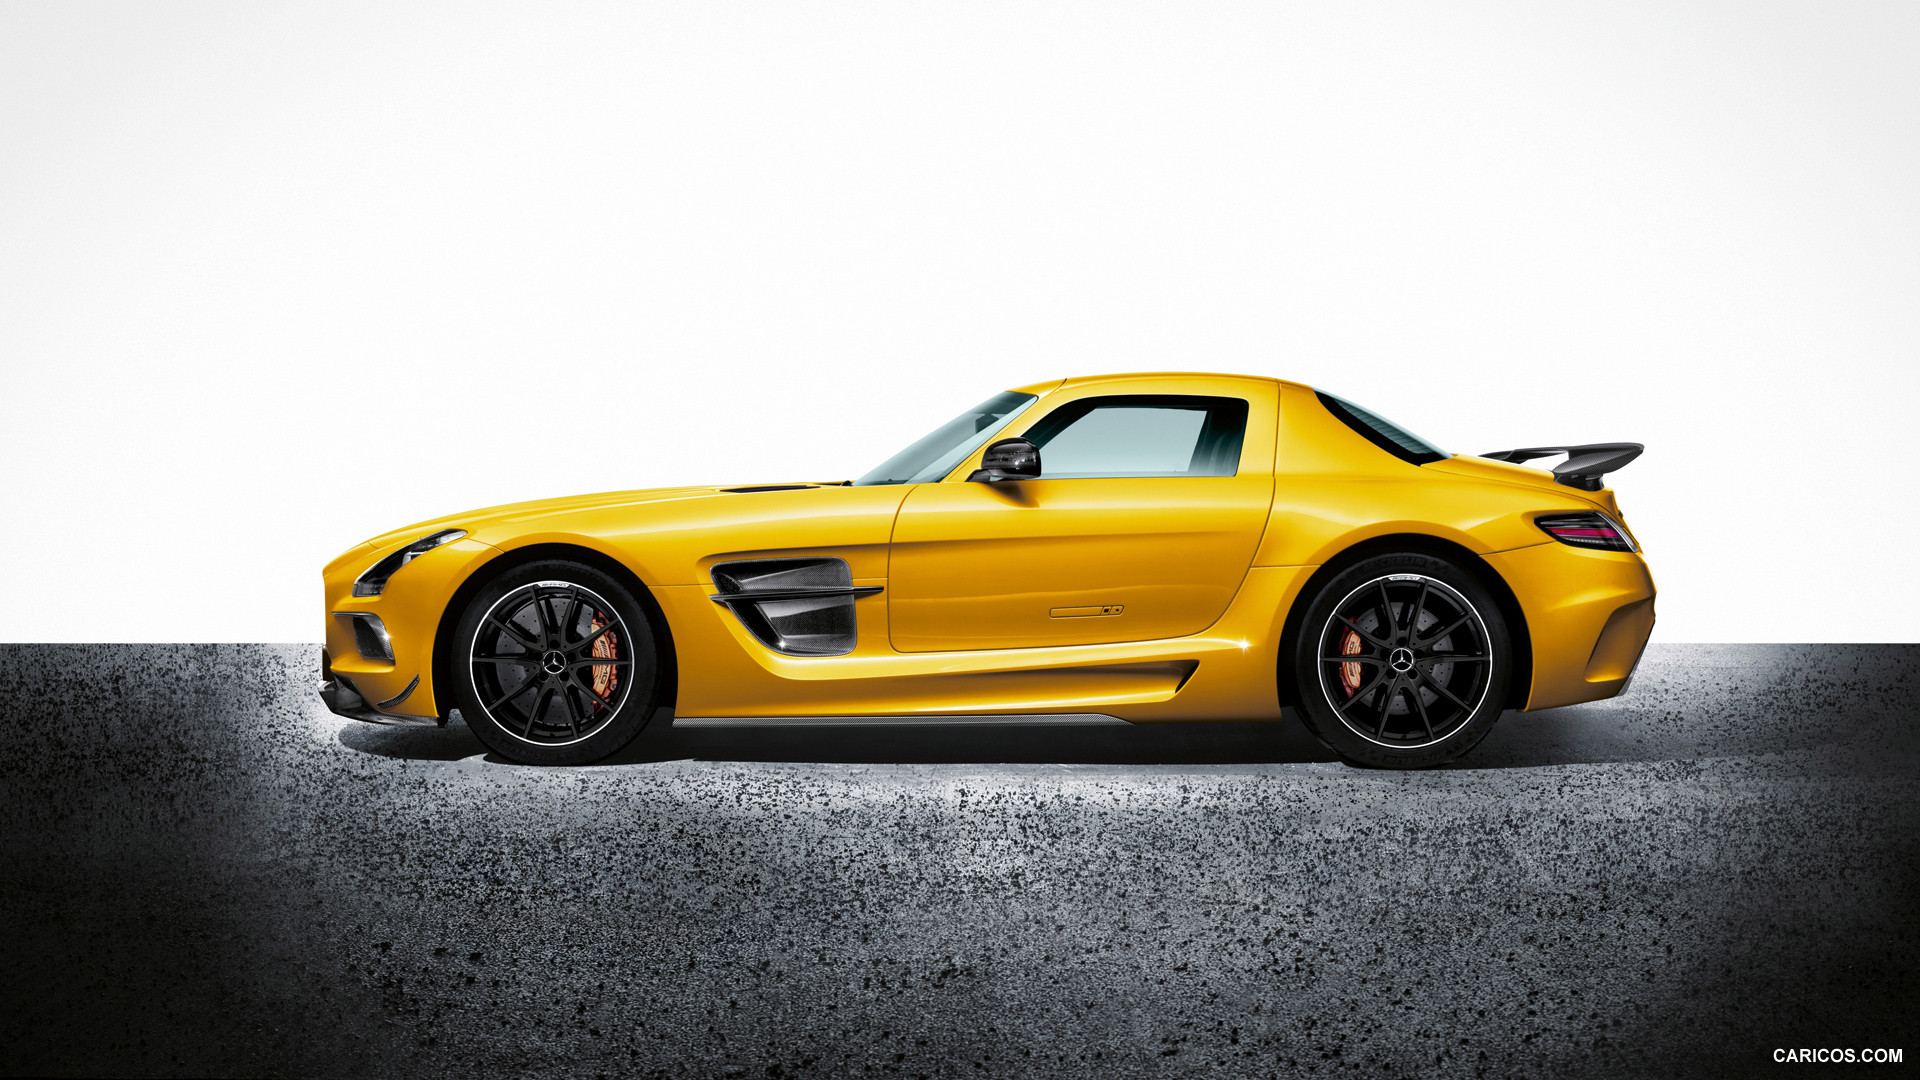 2014 Mercedes-Benz SLS AMG Coupe Black Series Solarbeam - Side, #13 of 40